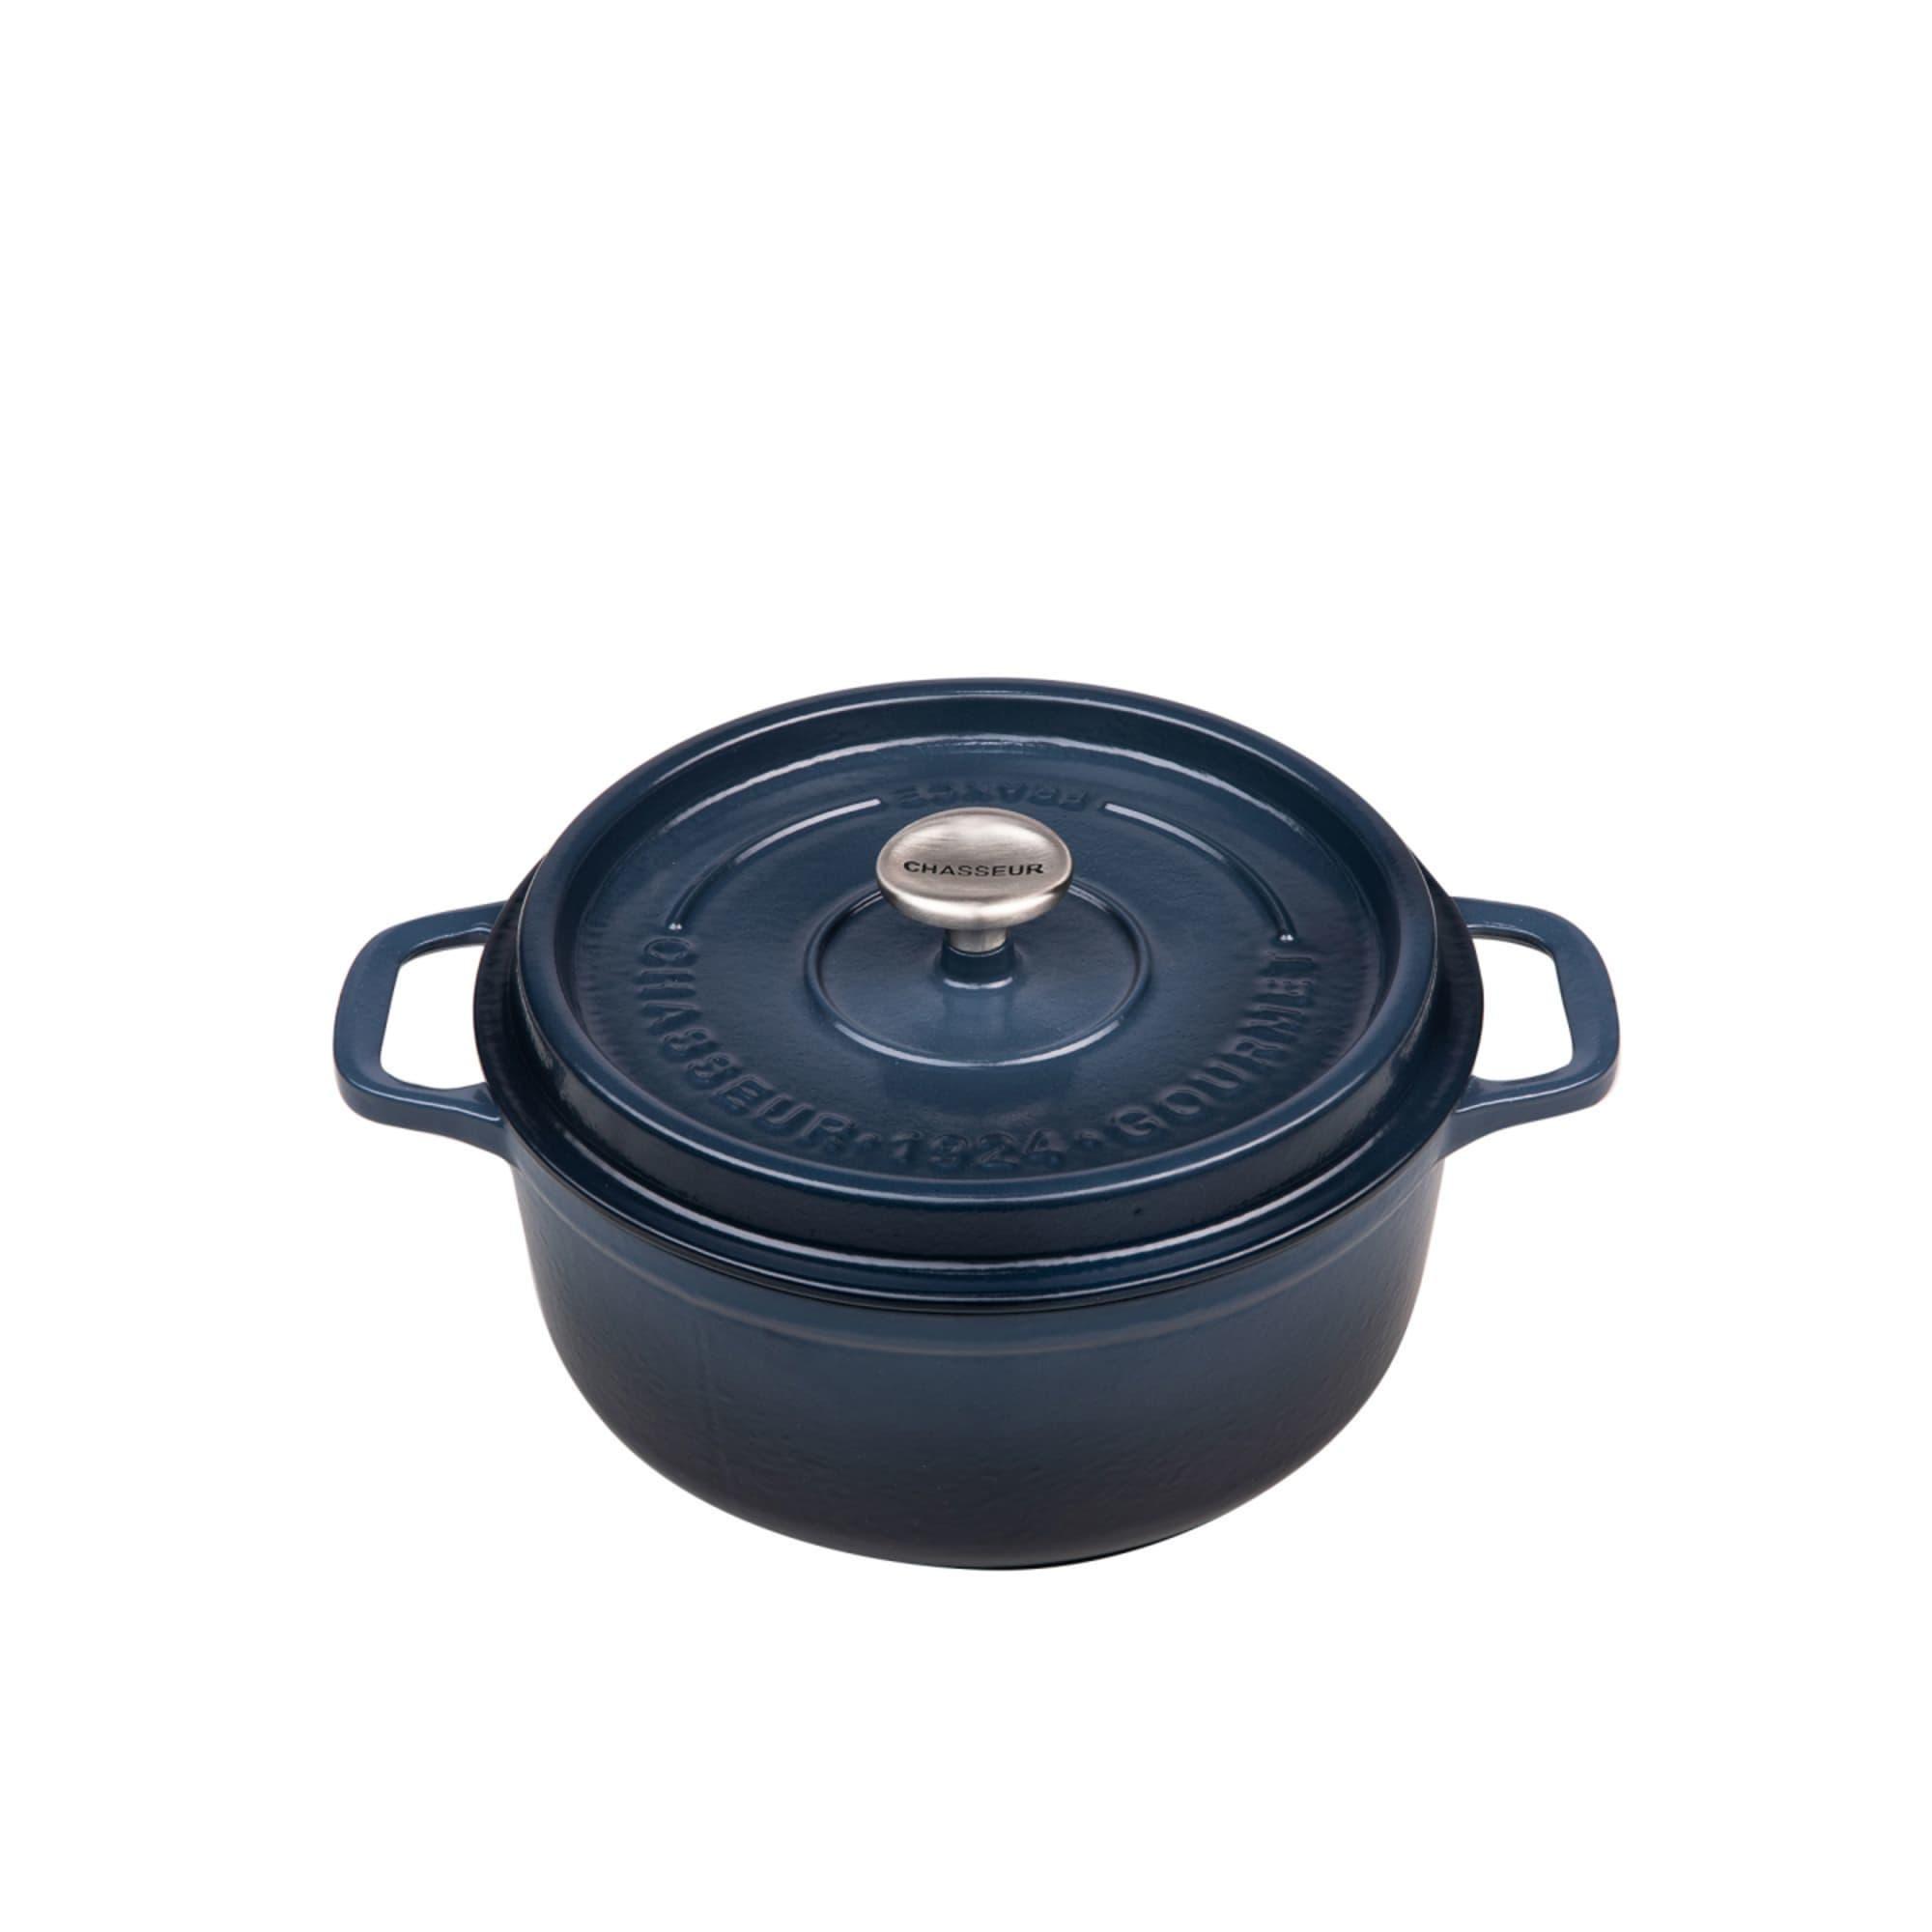 Chasseur Gourmet Round French Oven 24cm - 4L Midnight Blue Image 1